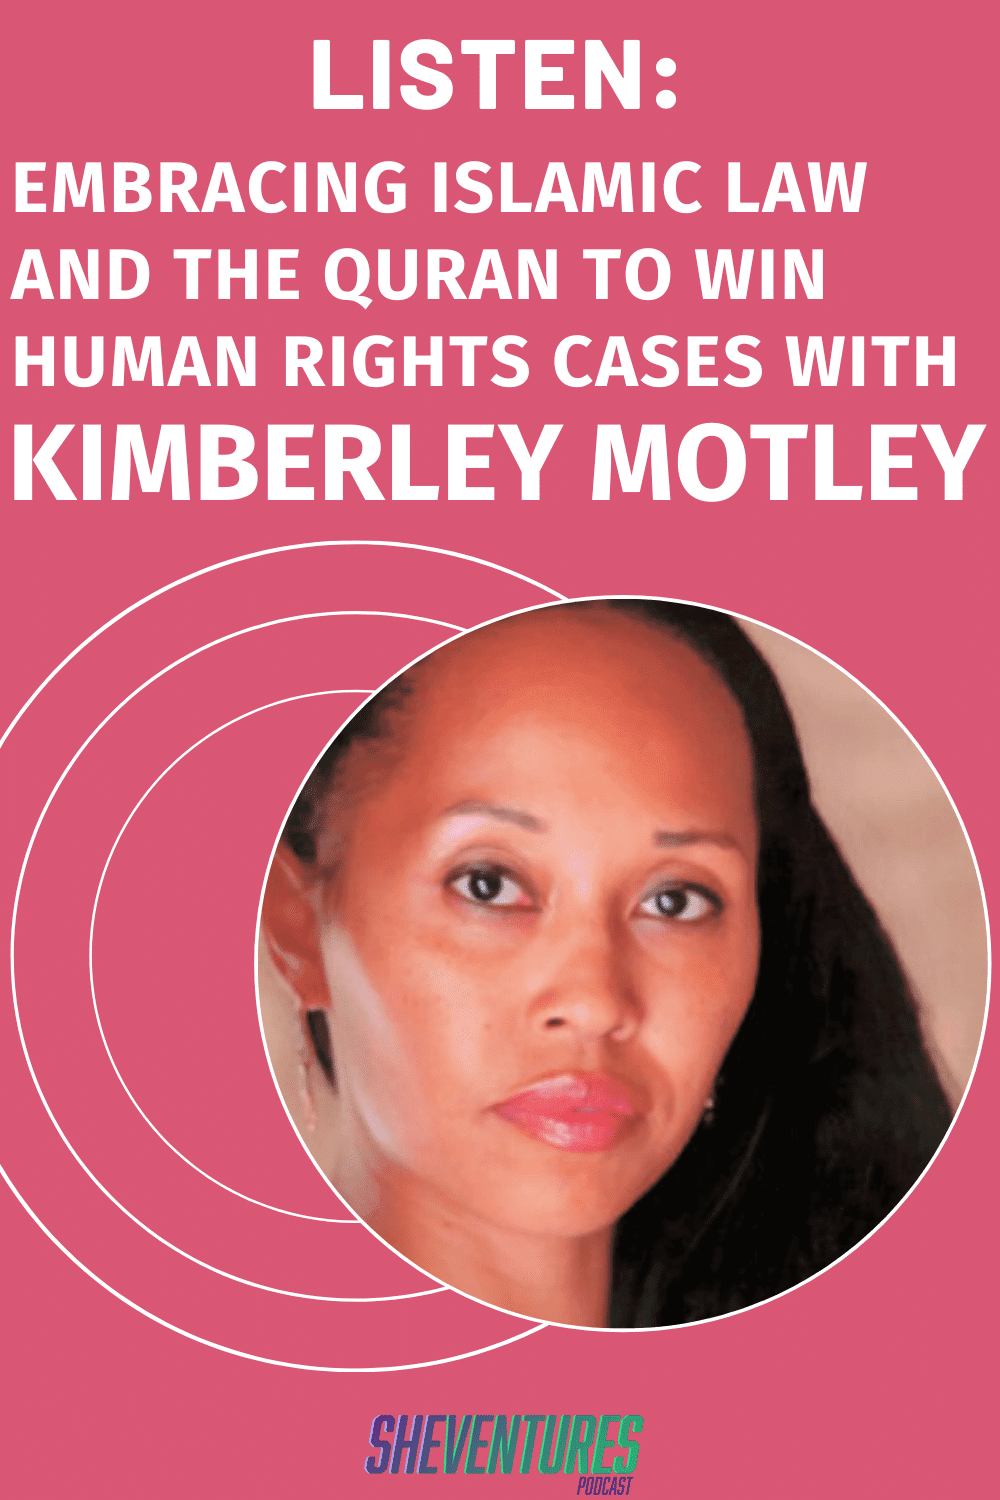 Listen: Embracing Islamic Law and the Quran to Win Human Rights Cases With Kimberley Motley